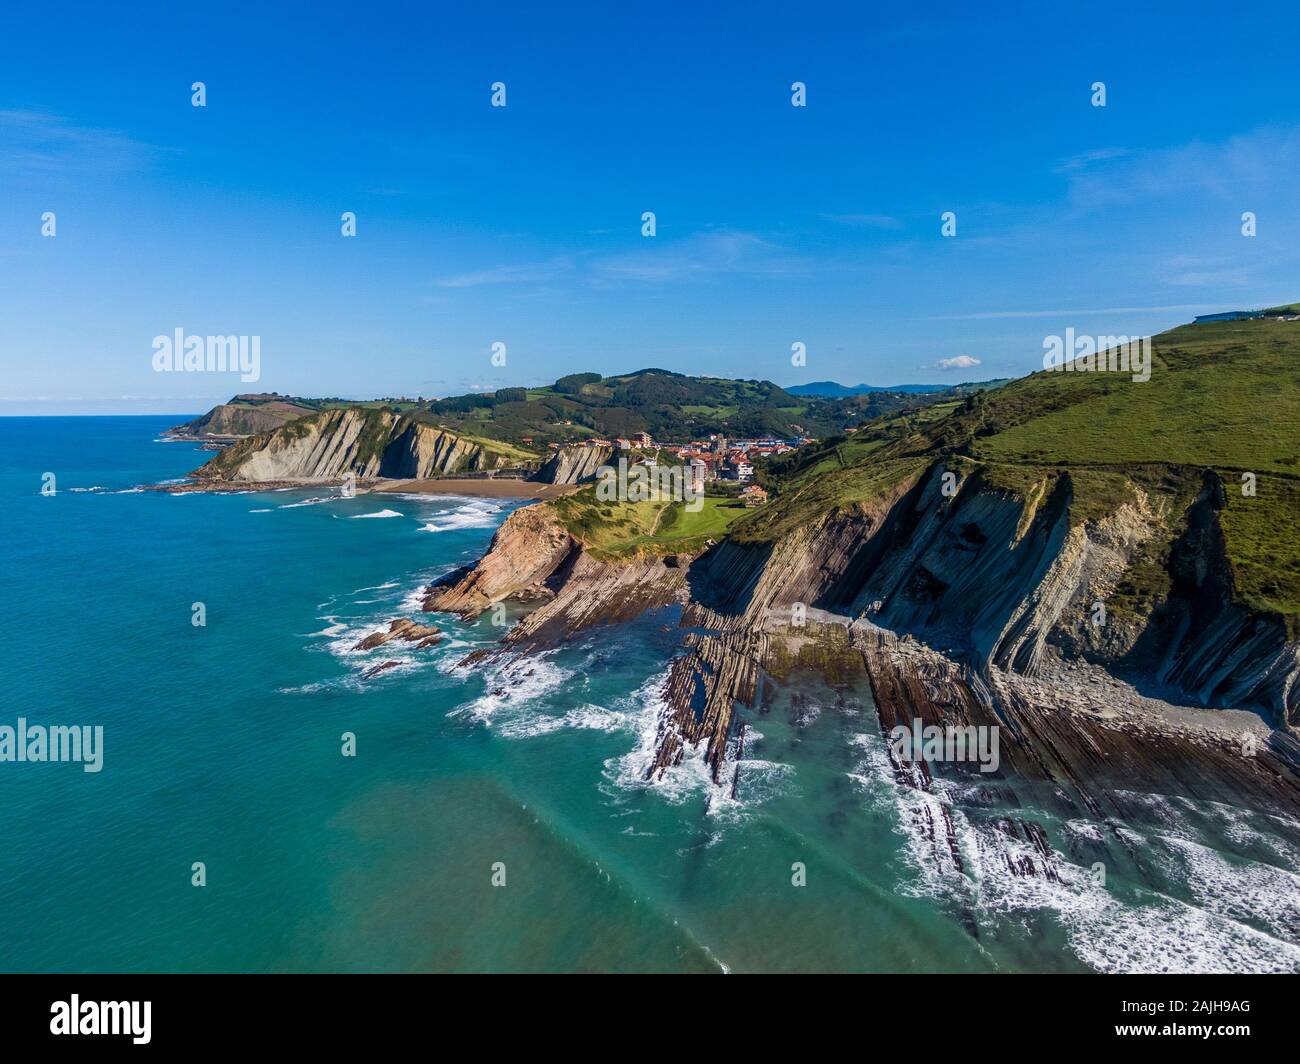 Aerial view of rock formations at Zumaia or Itzurun beach in Spain Stock Photo